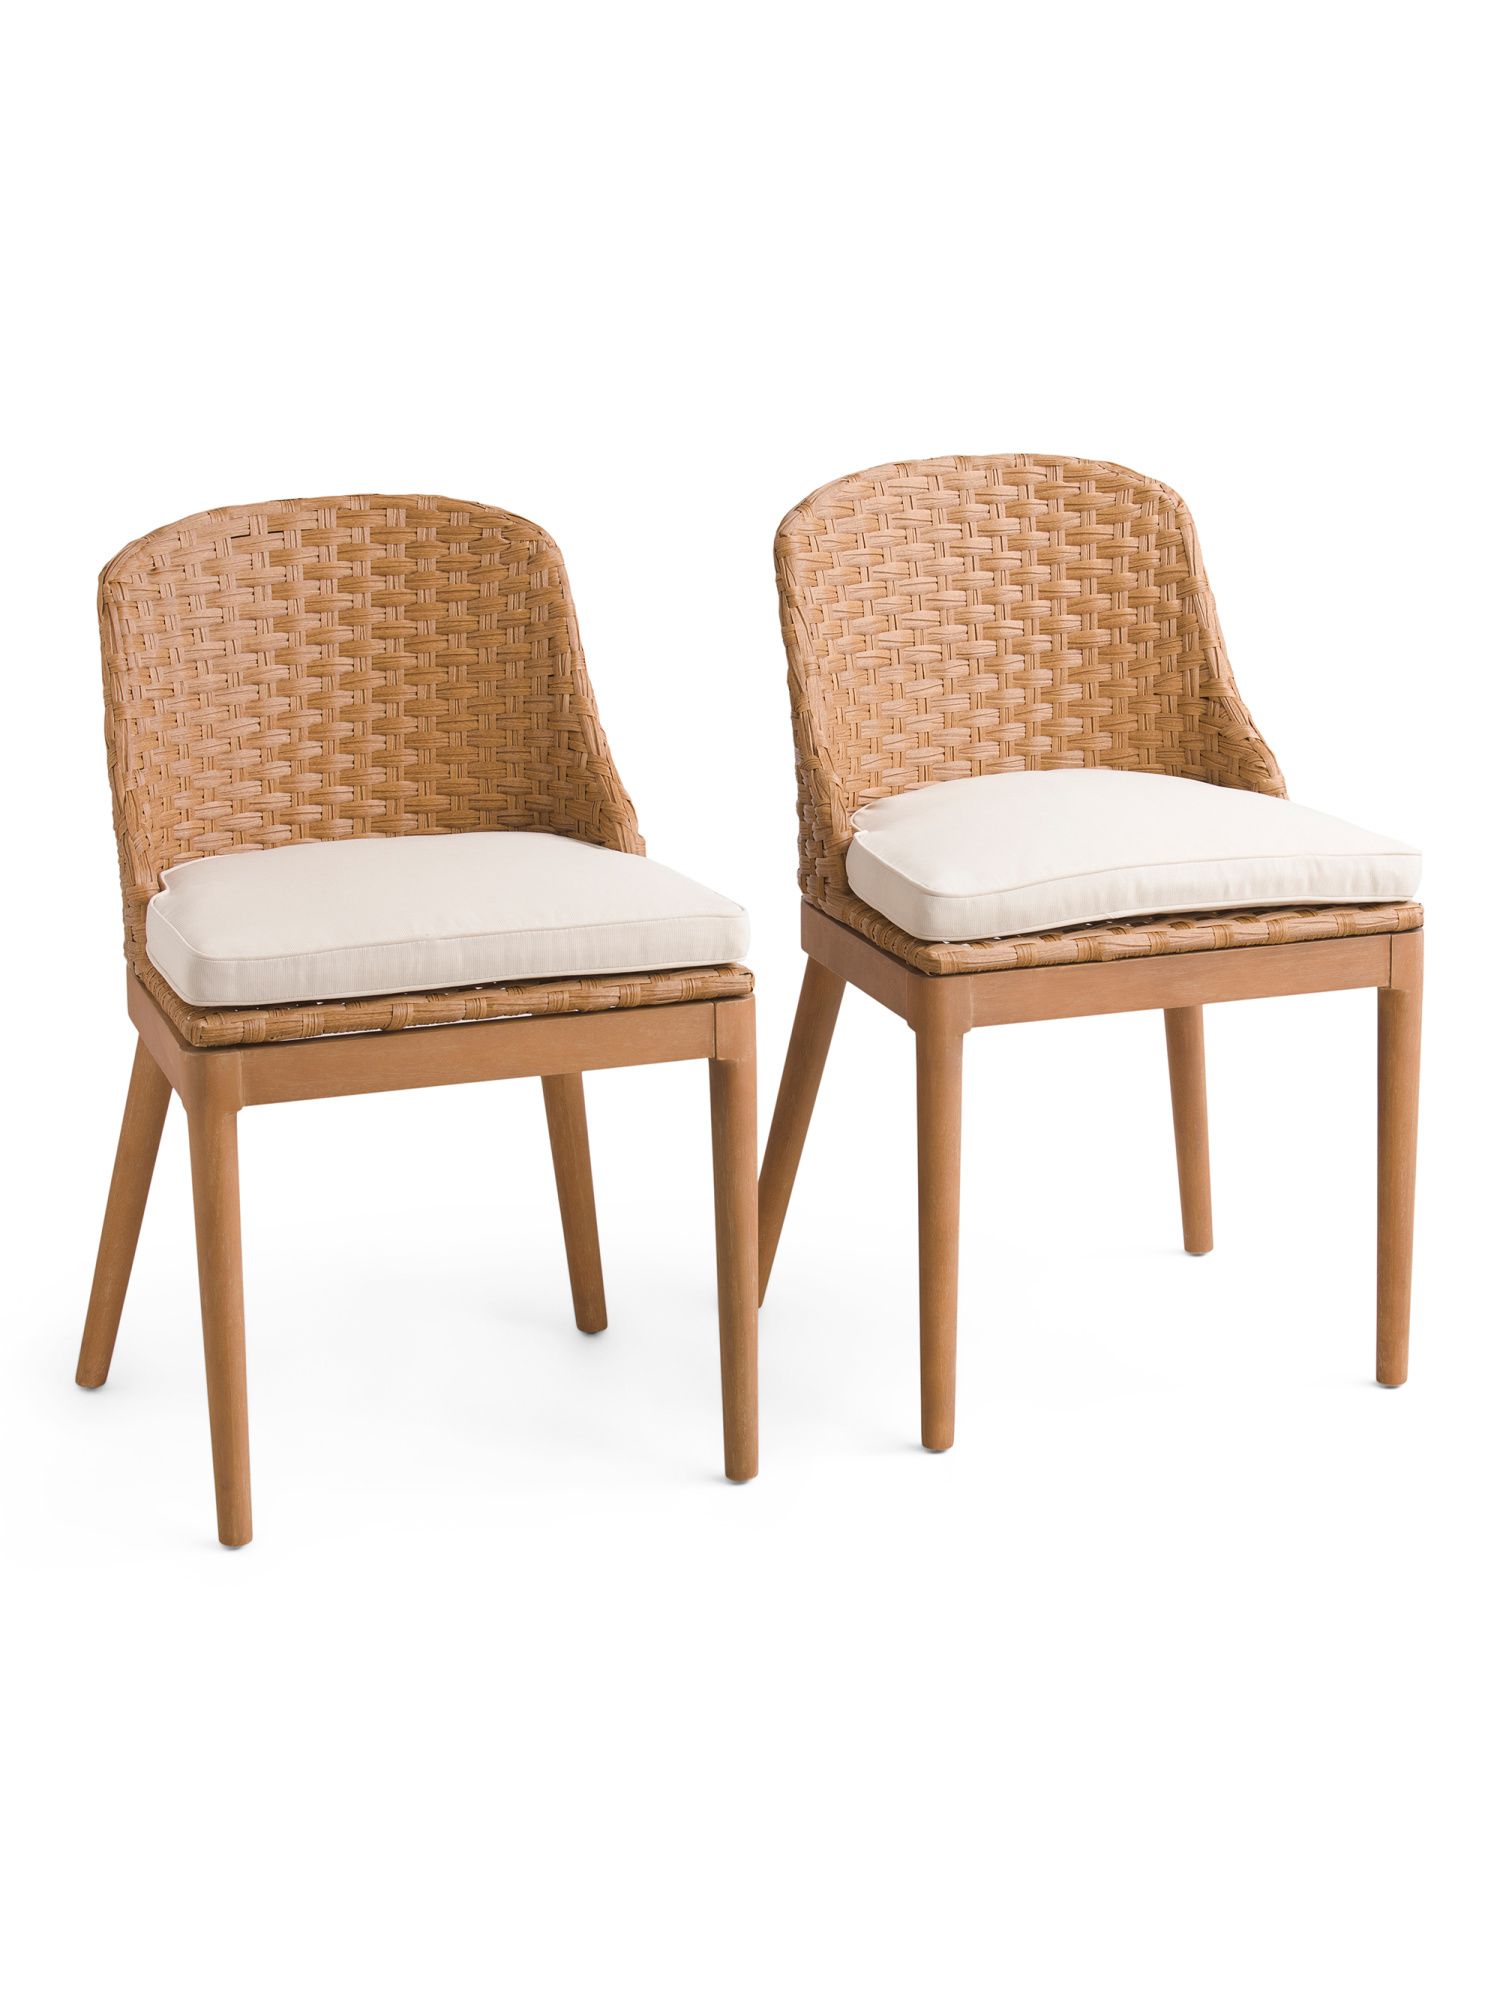 Set Of 2 Indoor Outdoor Seagrass Dining Chairs With Cushion | Kitchen & Dining Room | Marshalls | Marshalls